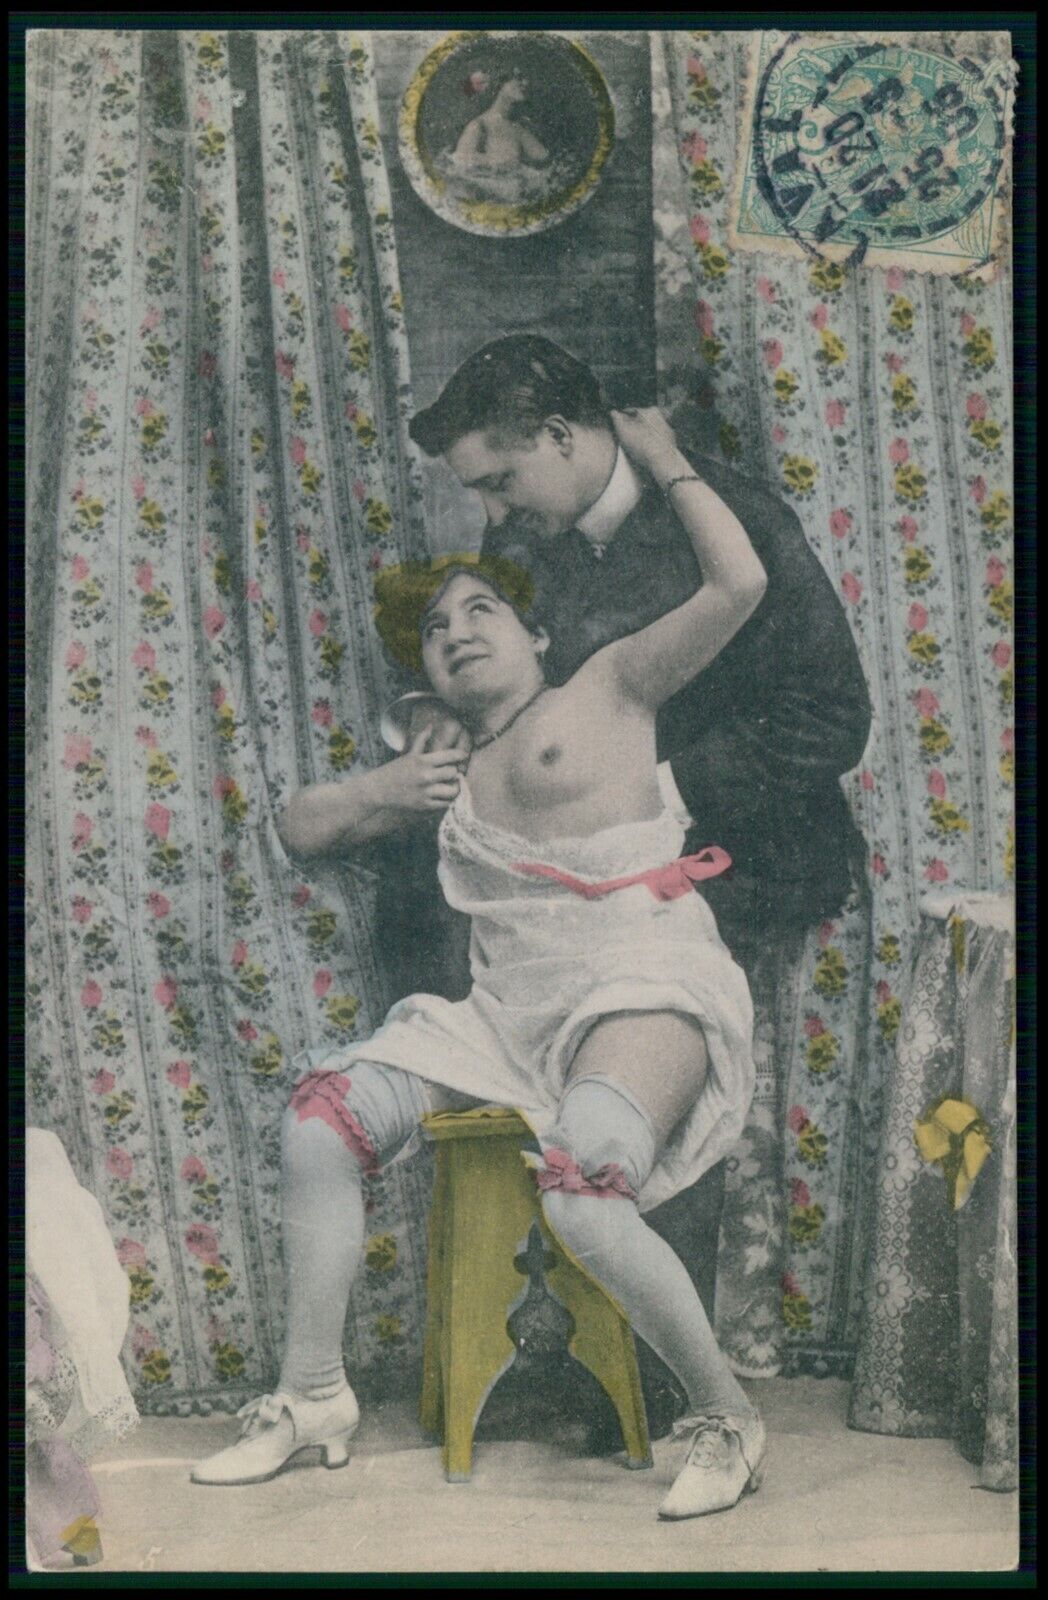 Prostitute nude woman at brothel original old 1900s French postcard lot set of 6